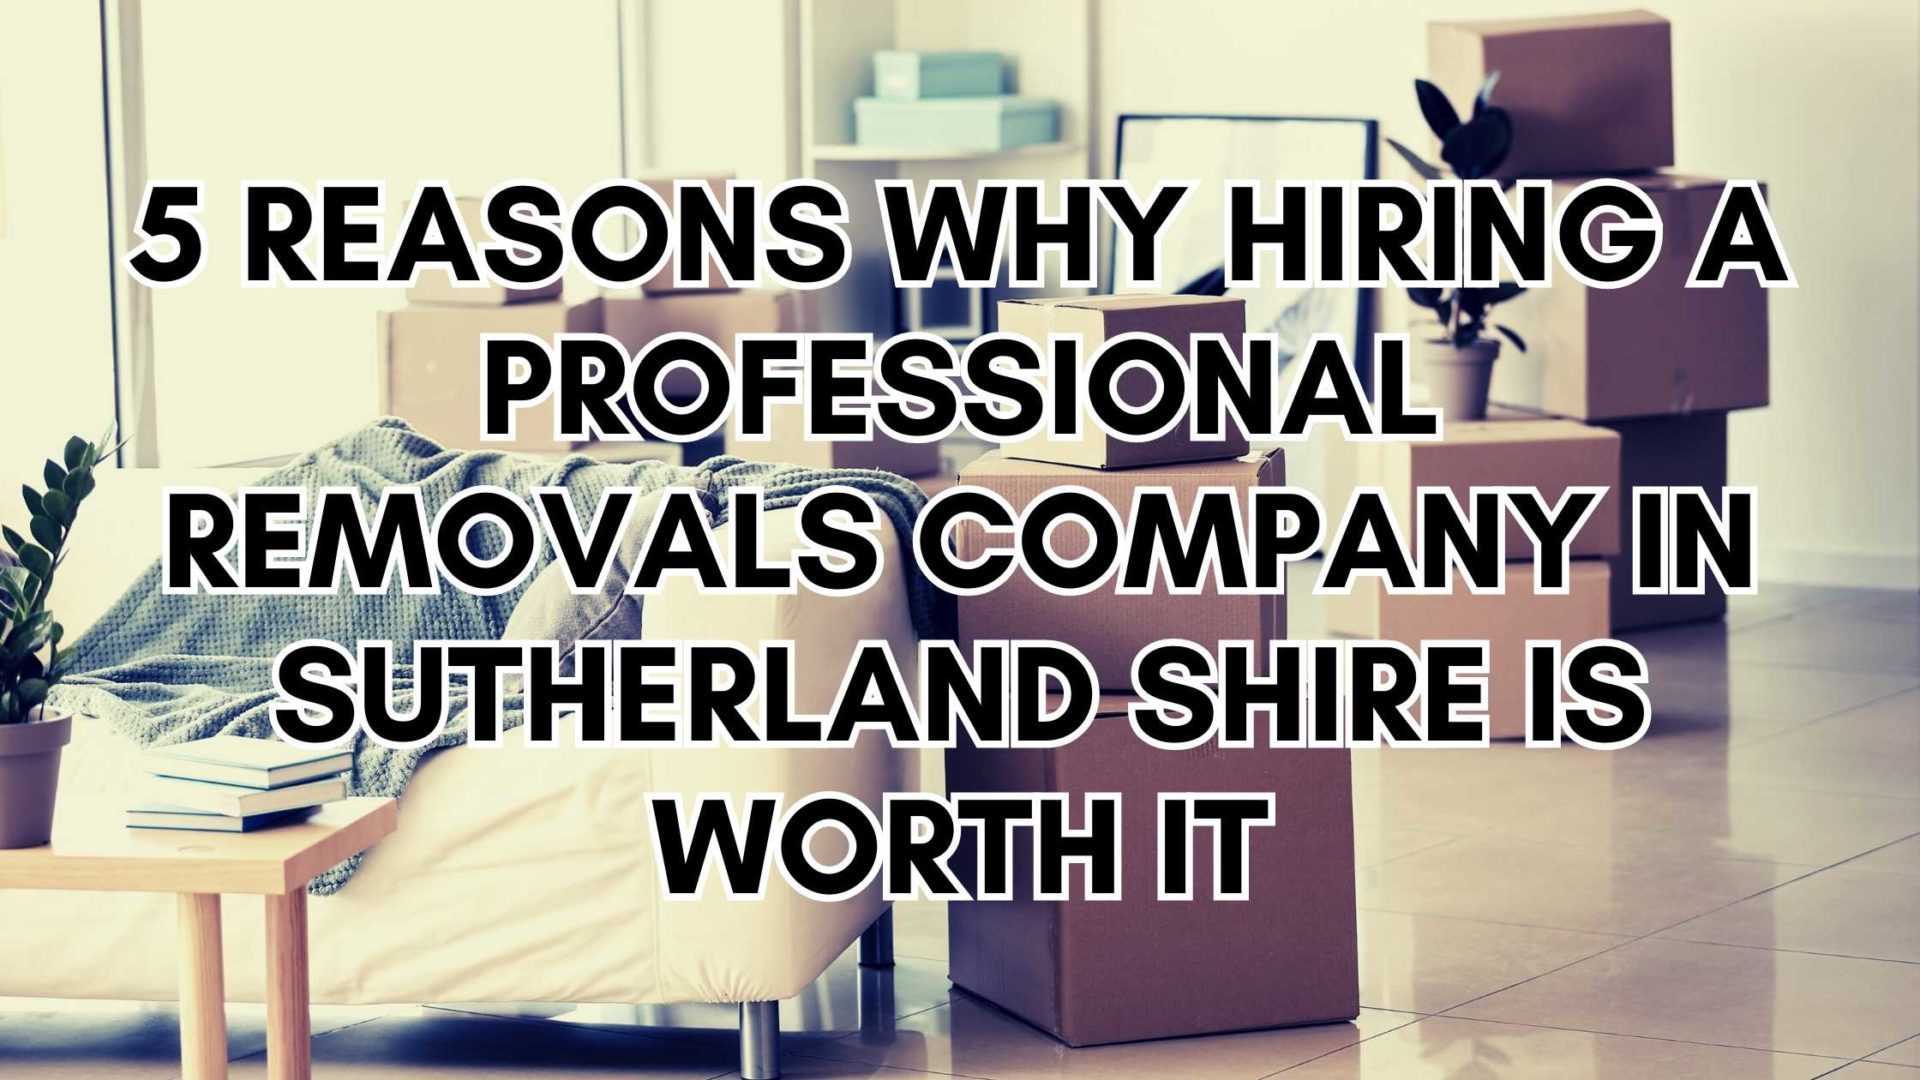 5 Reasons Why Hiring a Professional Removals Company in Sutherland Shire is Worth It